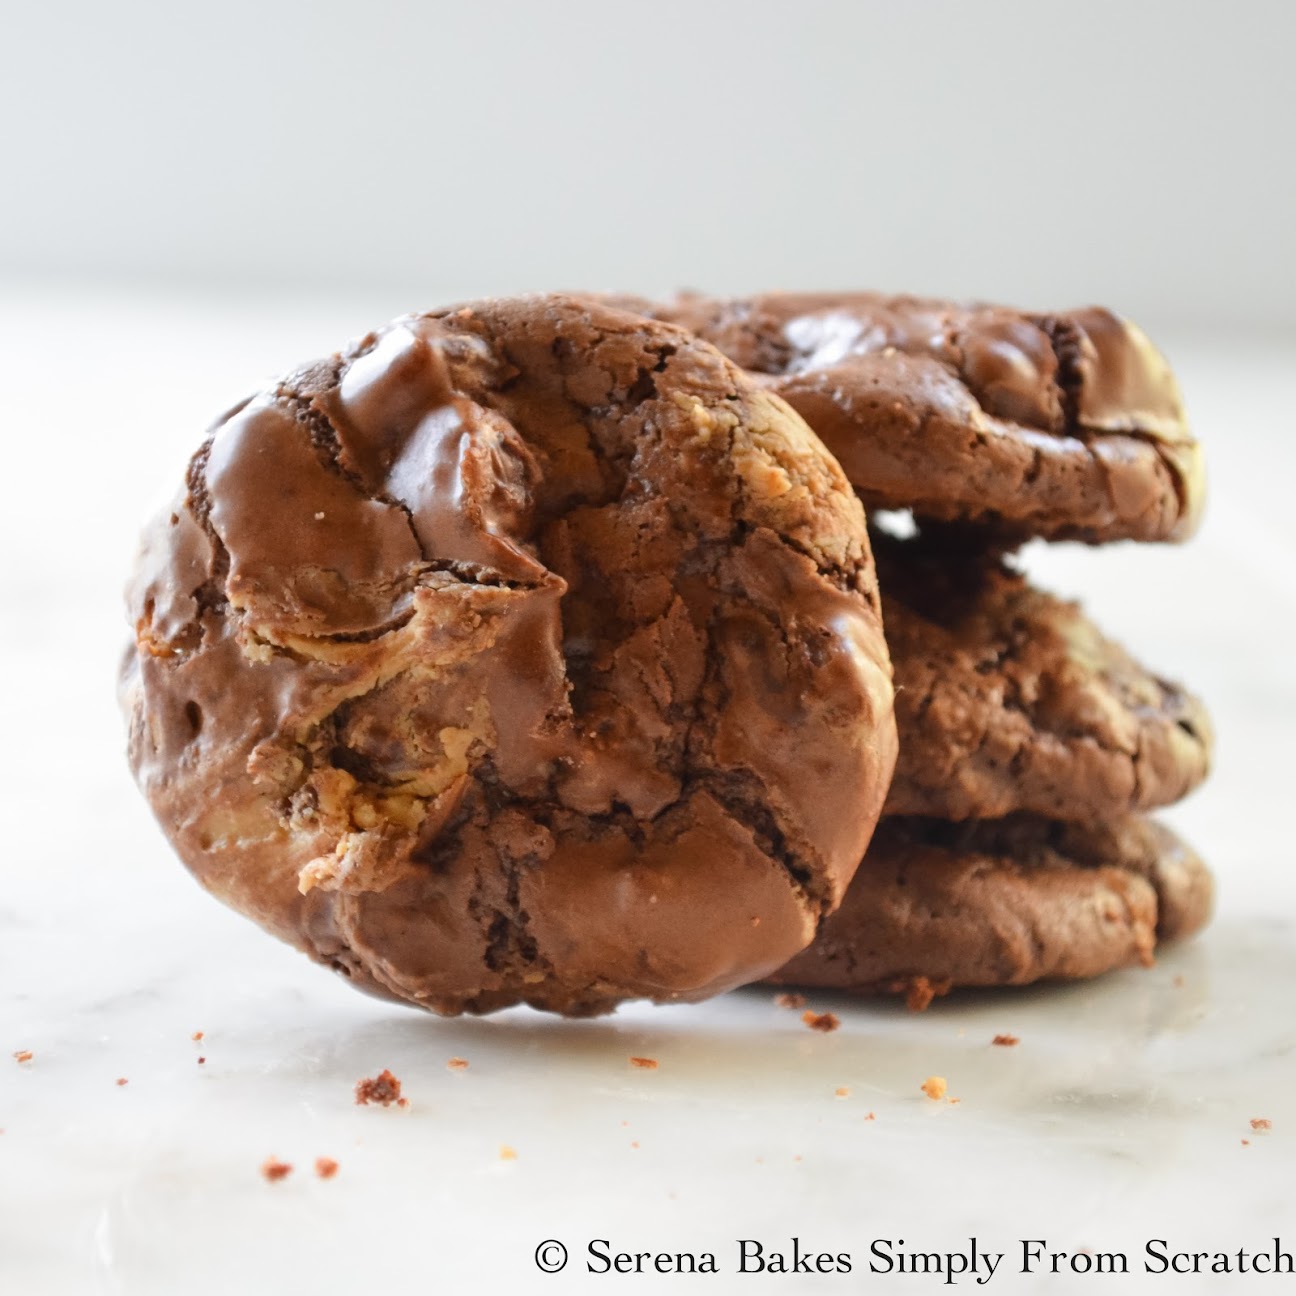 25 Last Minute Christmas Cookie Ideas. Flourless Brownie Peanut Butter Swirl Cookies serenabakessimplyfromscratch.com